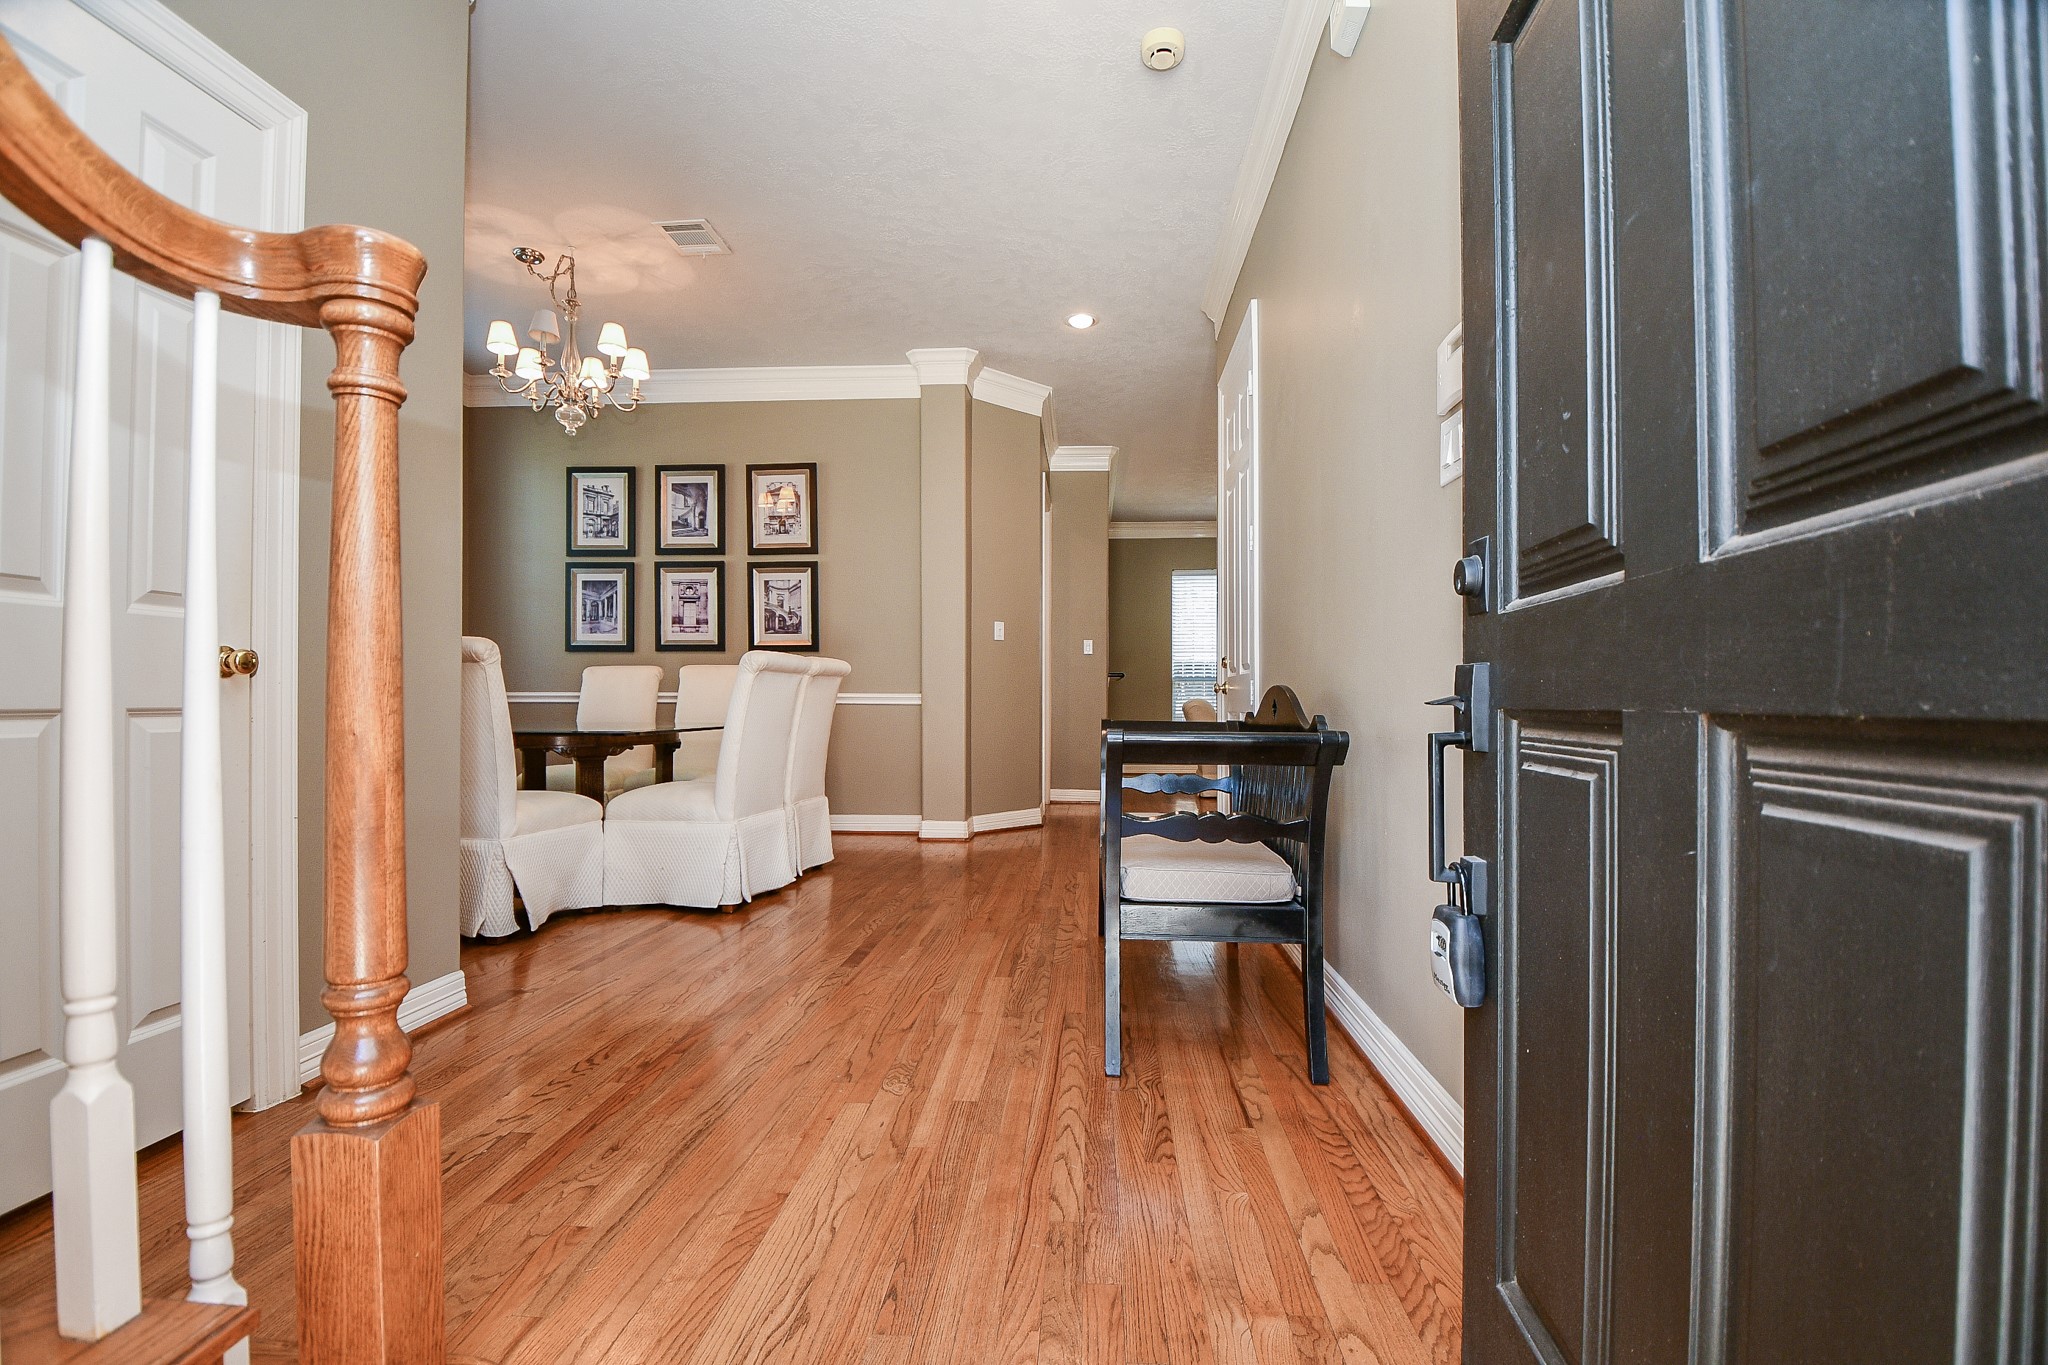 Nice Open Floor Plan with Gleaming Hard Wood Flooring throughout the First Floor